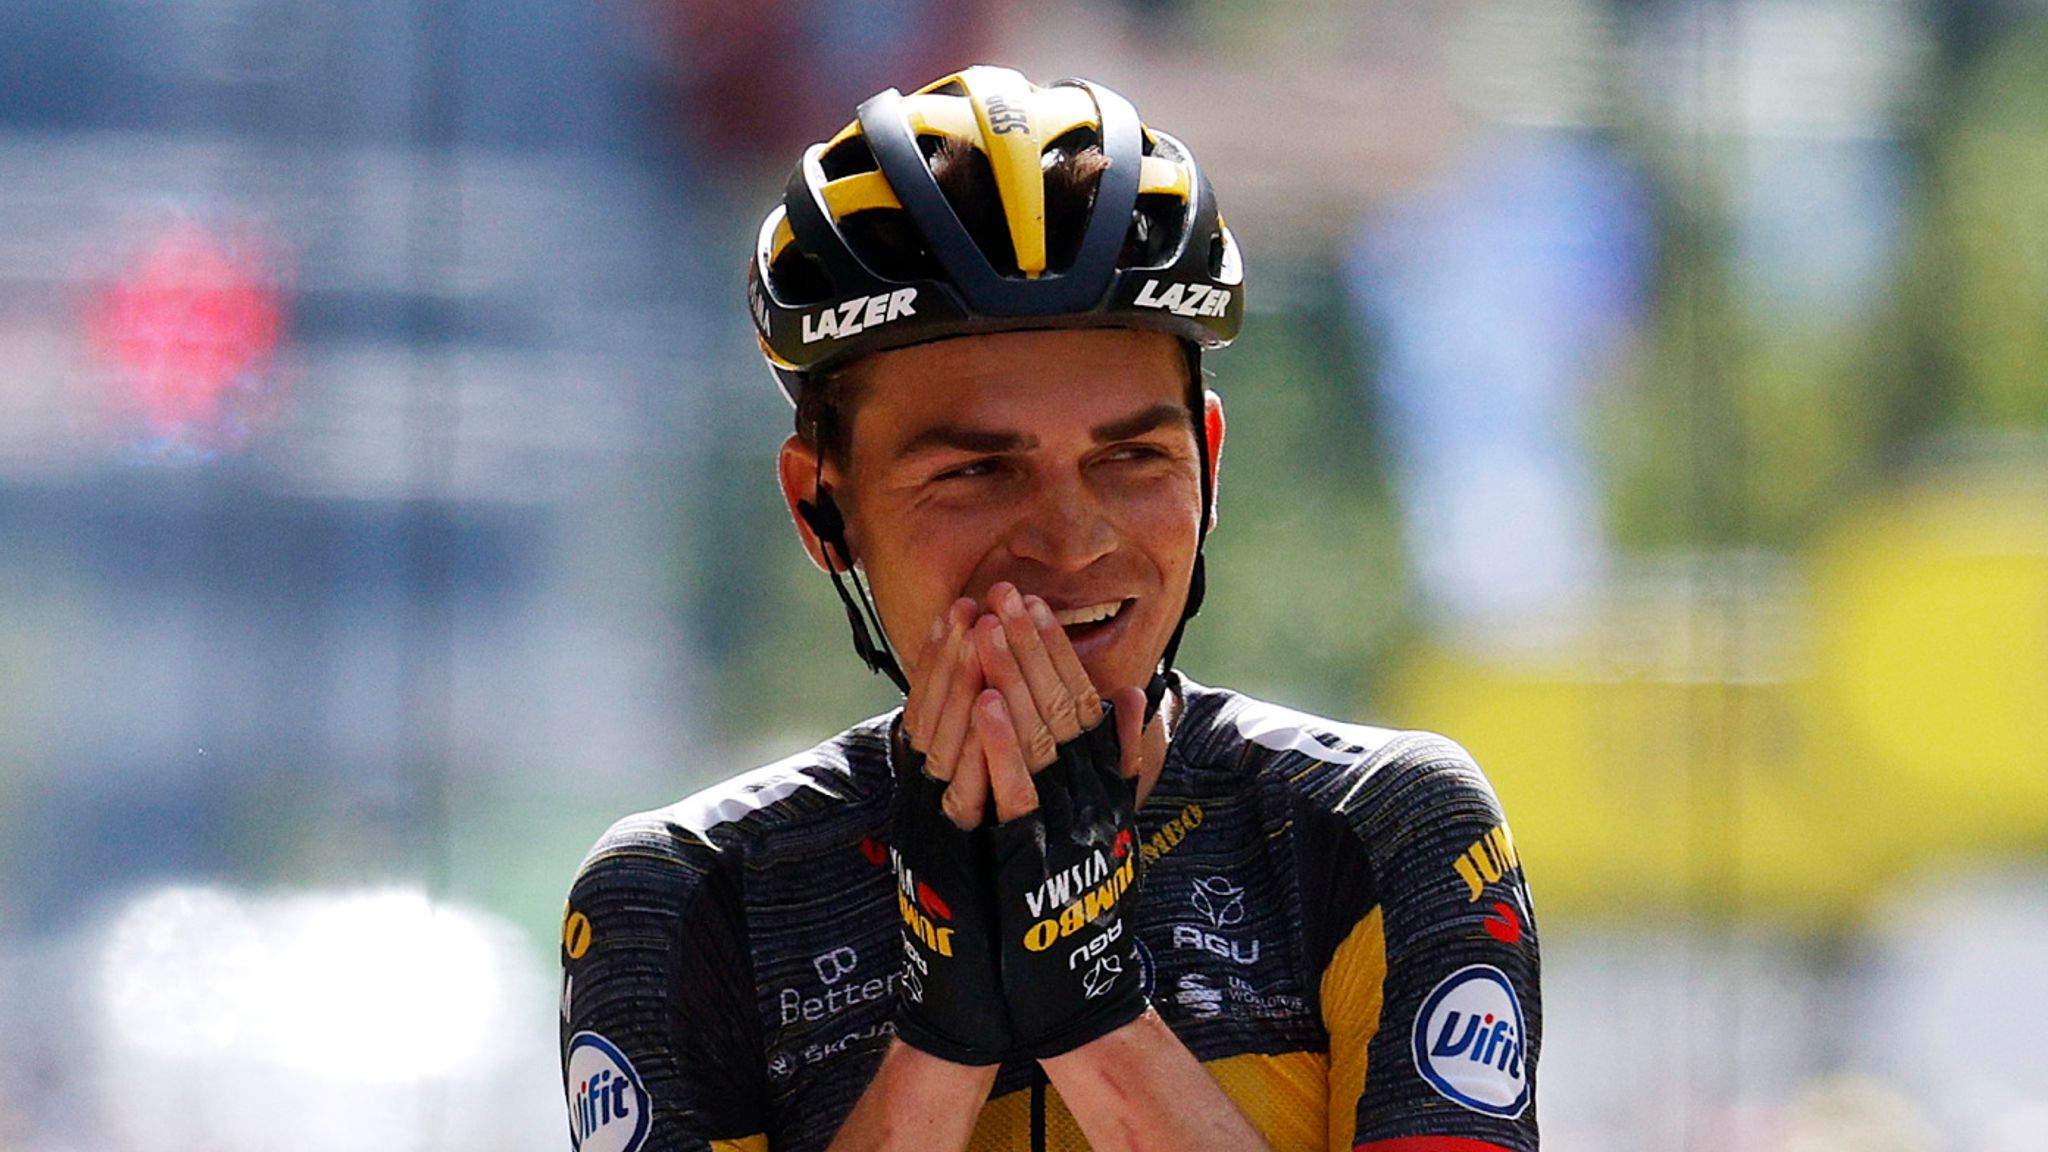 Tour de France Sepp Kuss first American to win stage in decade